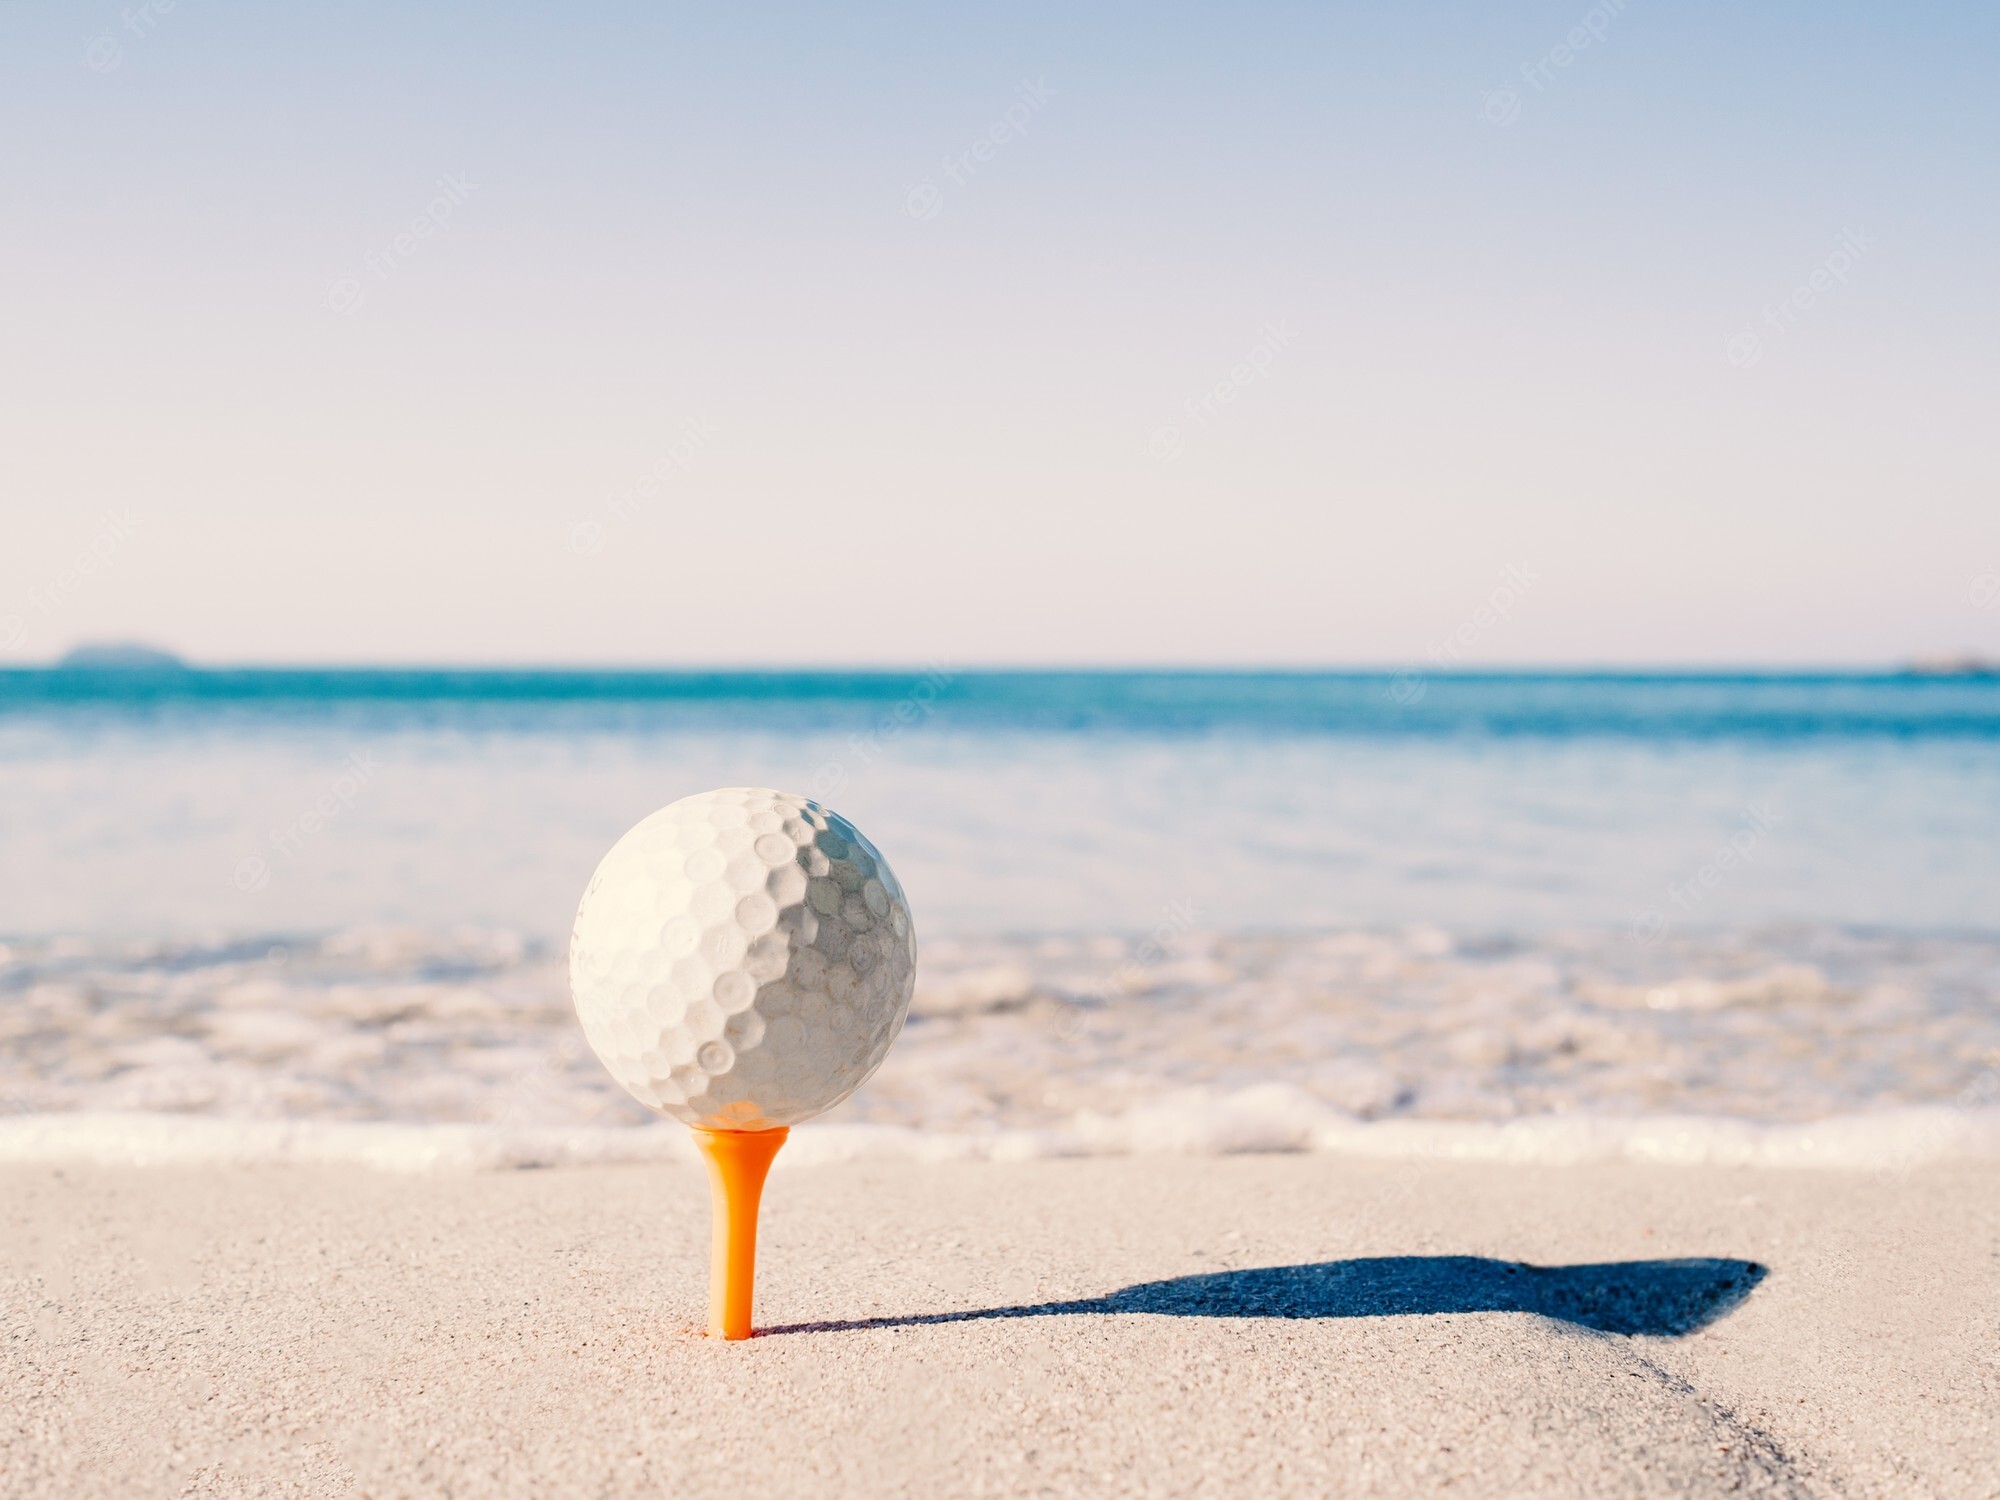 Beach Golf: A club-and-ball sport designed to be played on crowded seashores during the summer. 2000x1500 HD Wallpaper.